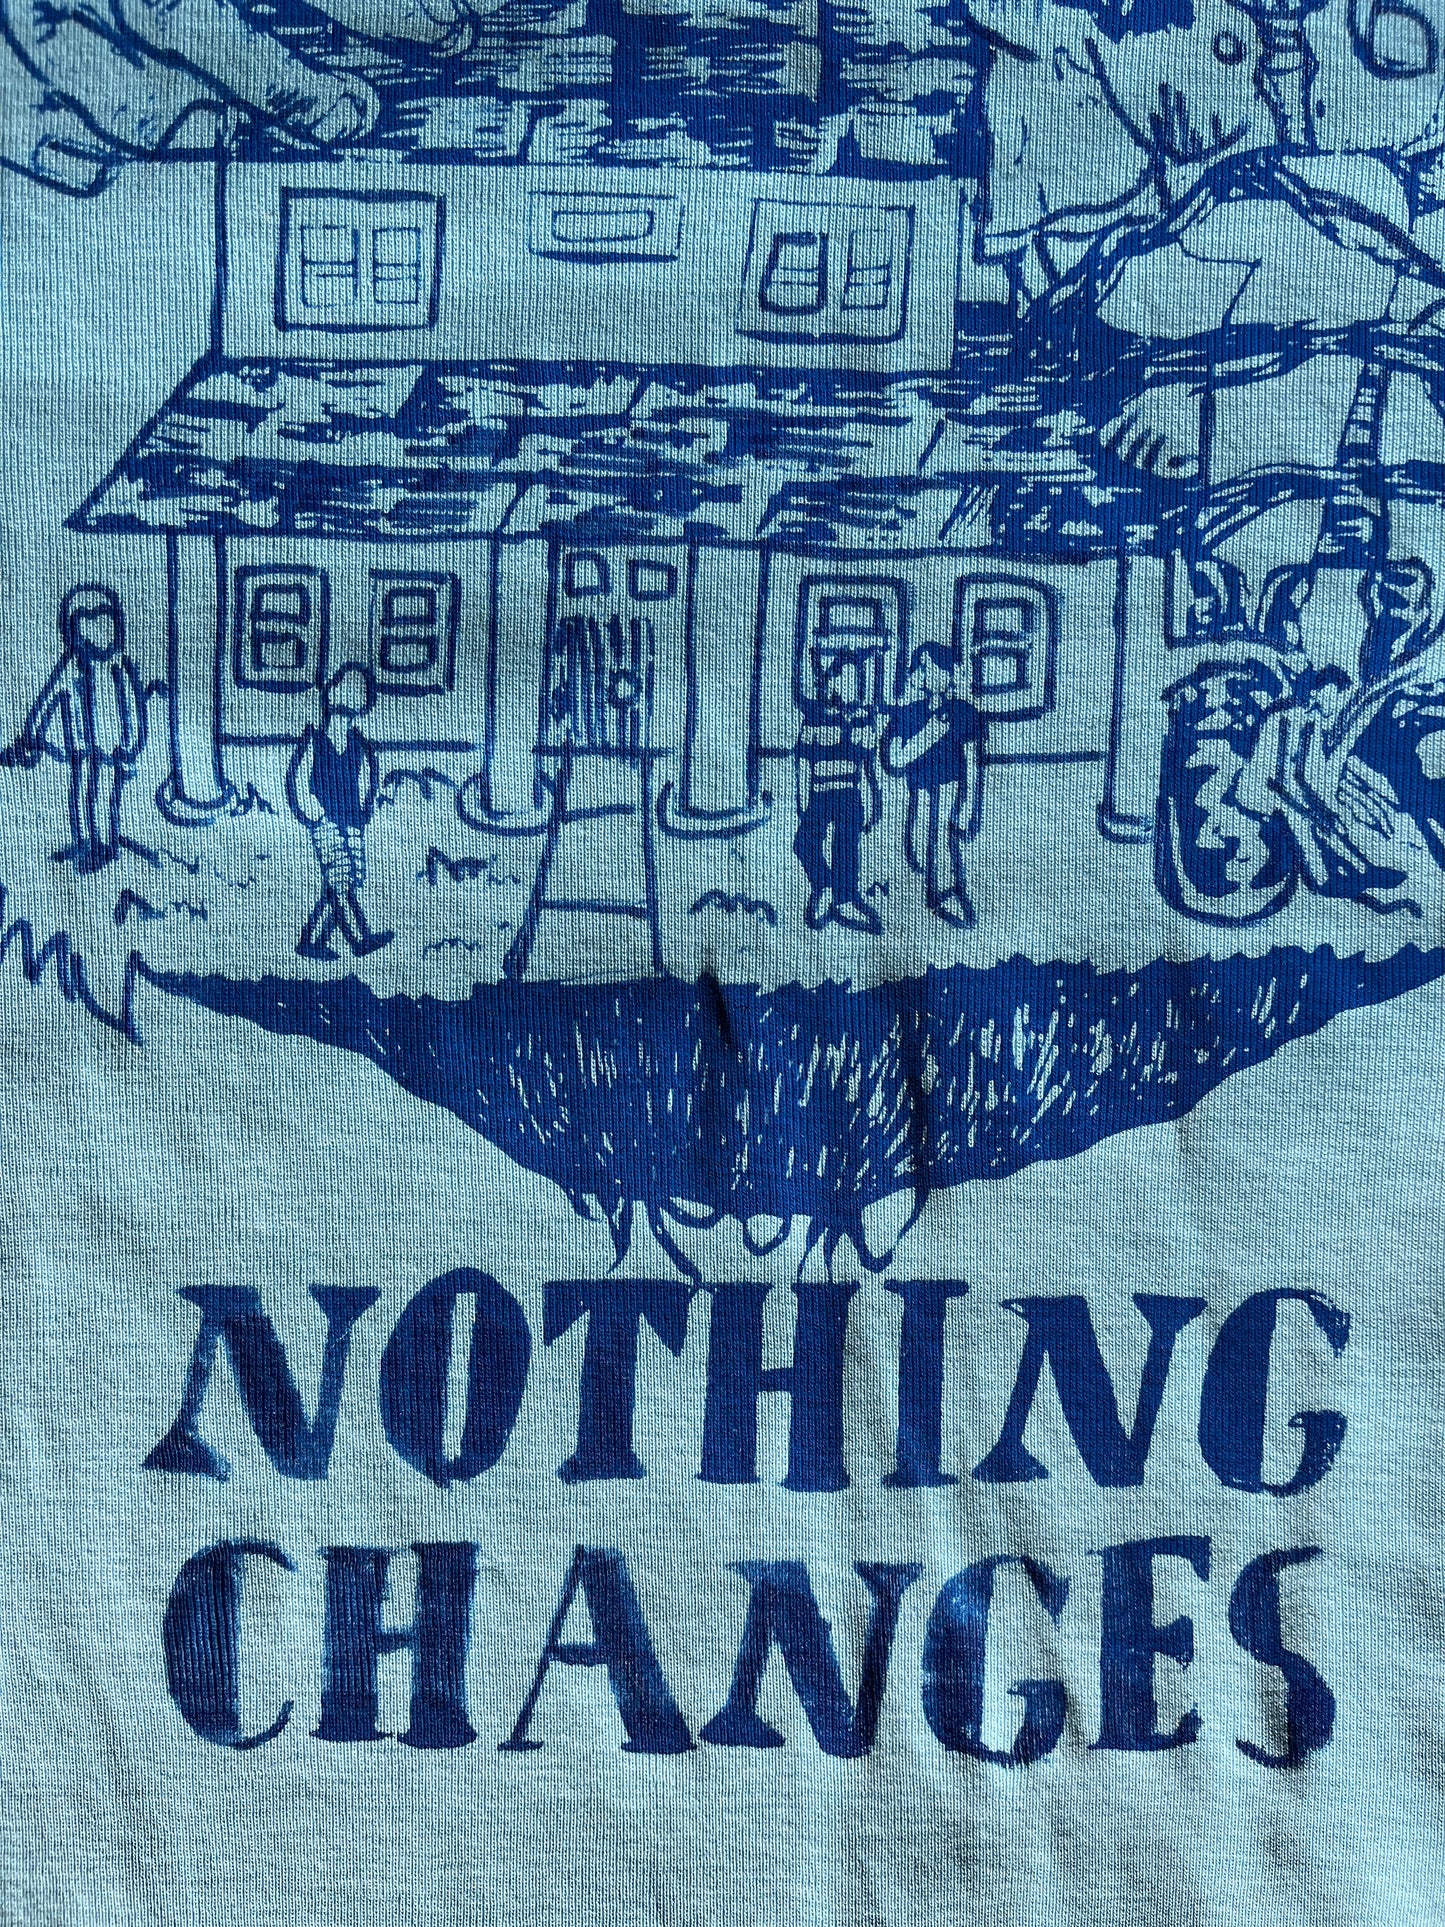 SMALL Nothing Changes short sleeve blue graphic tee shirt 04